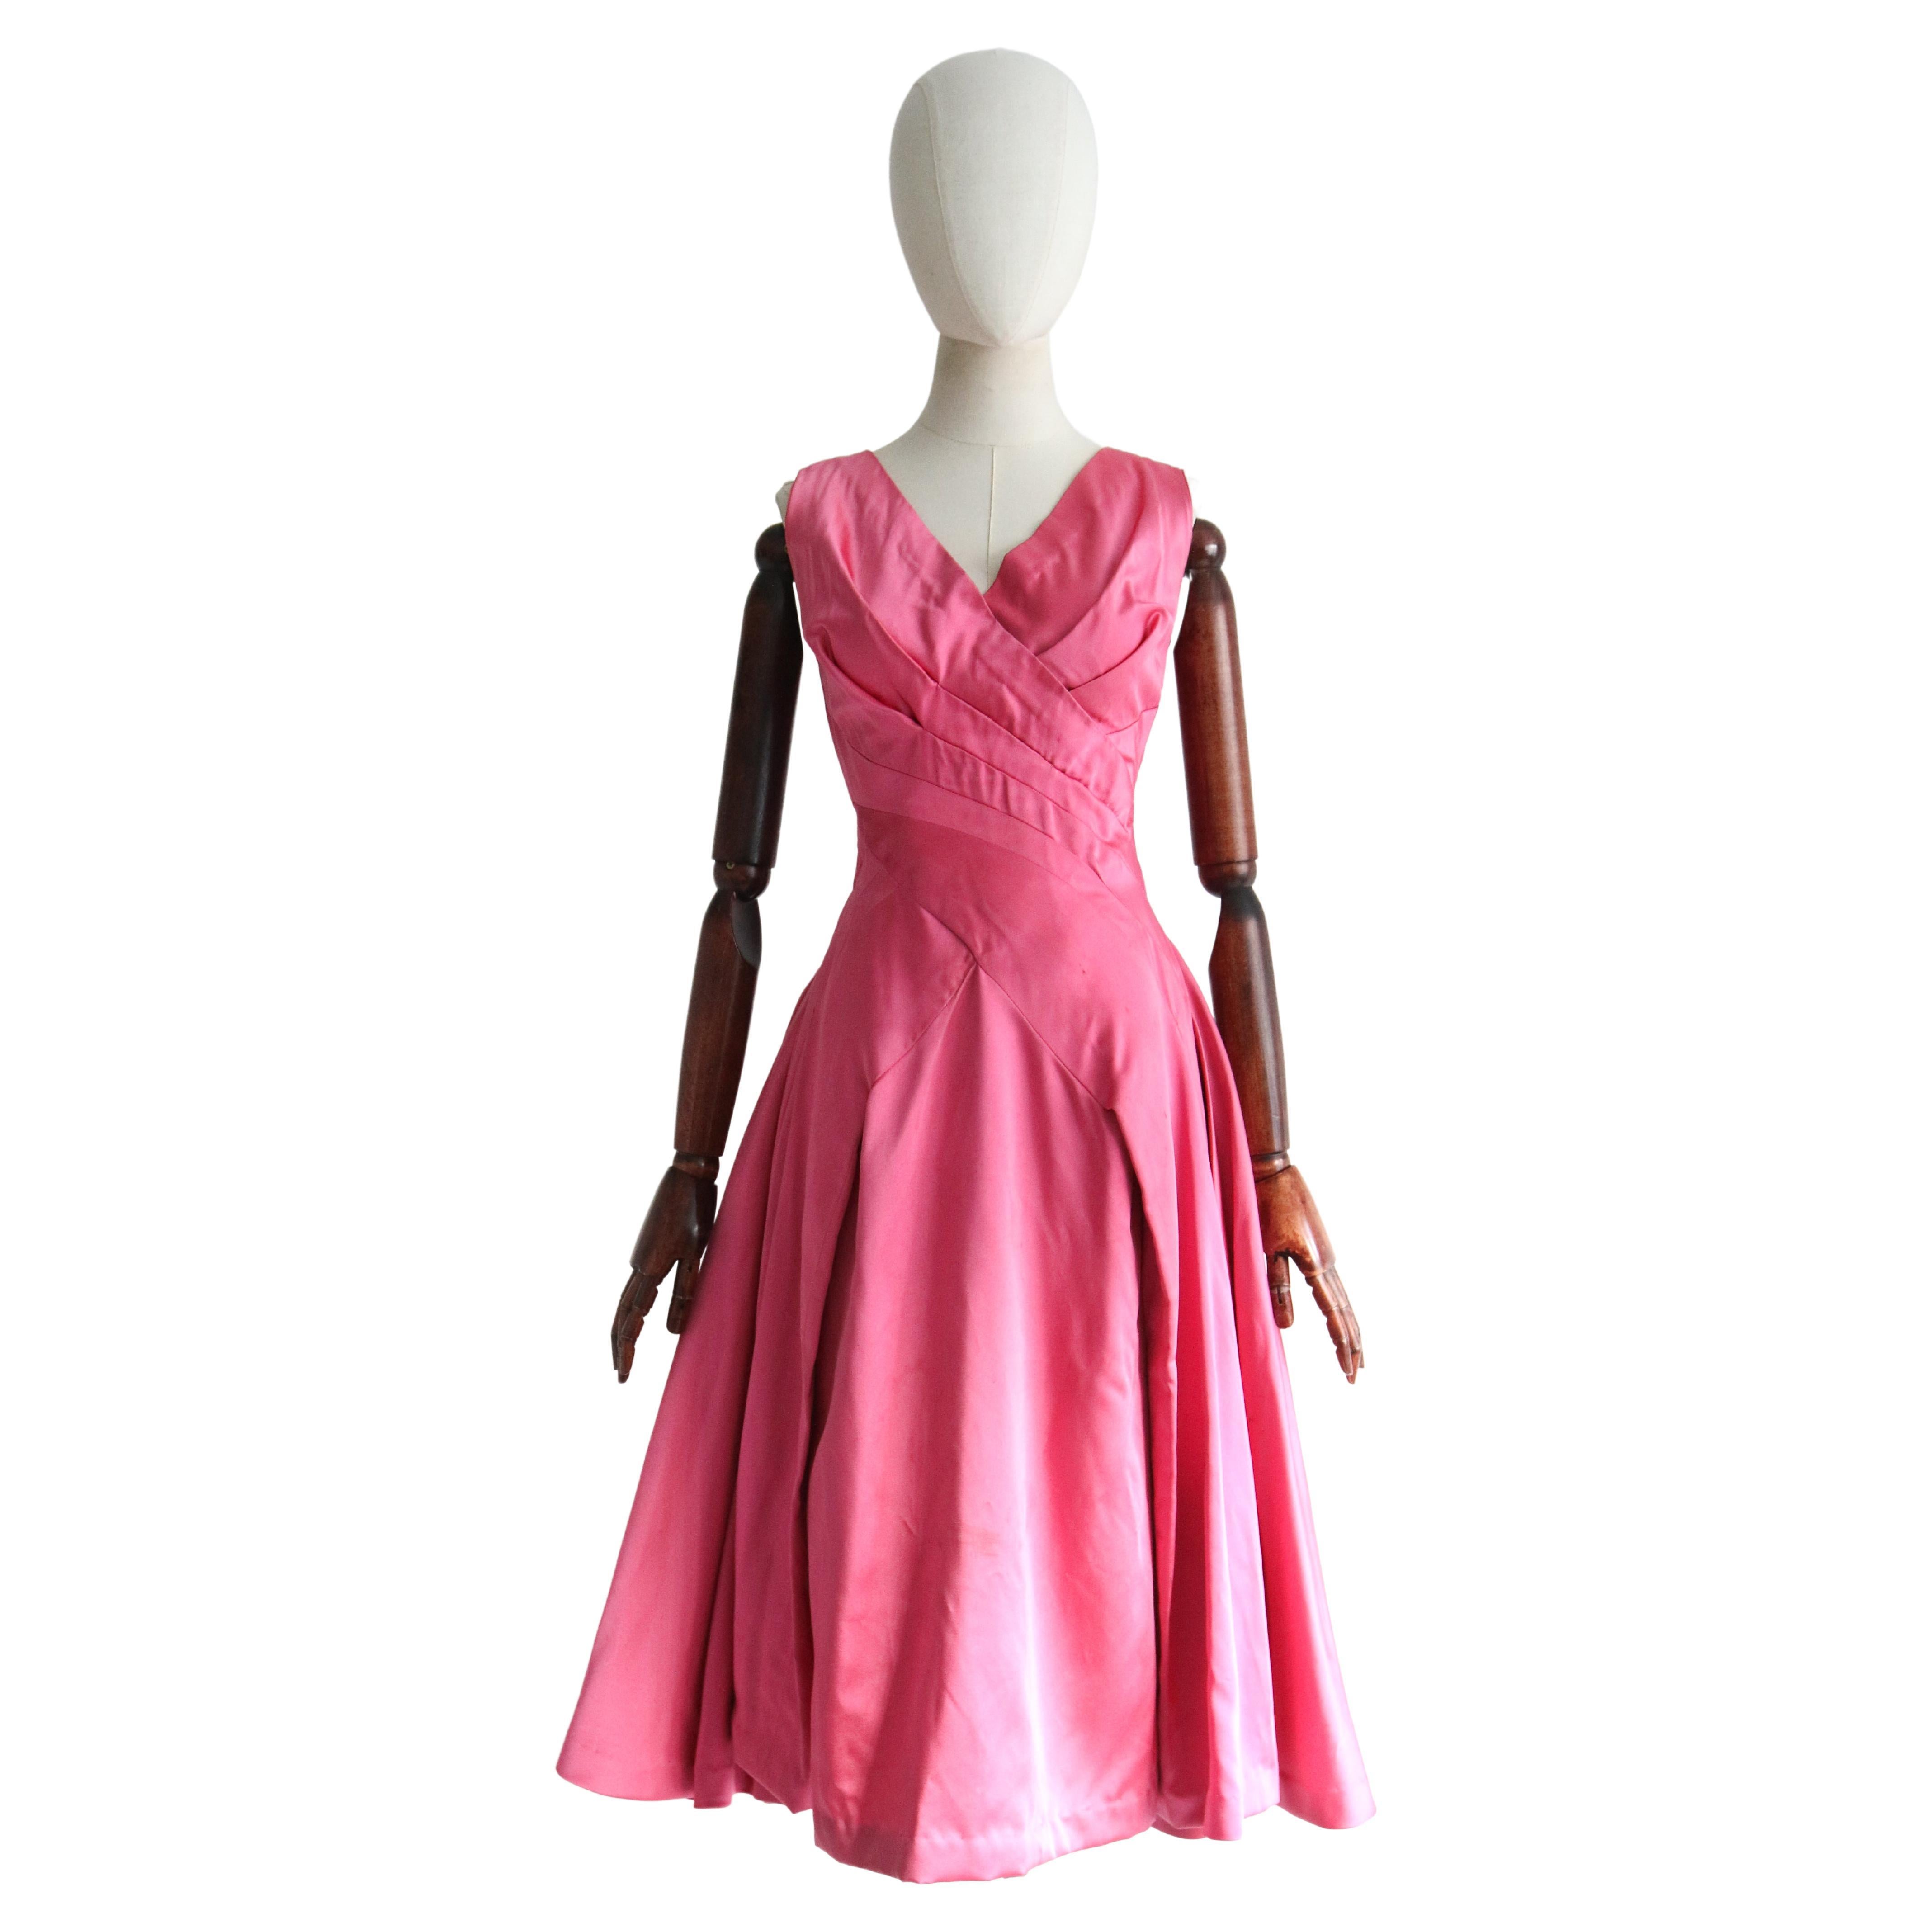 Vintage 1950's Duchess Satin Sweet Pink Pleated Dress UK 8-10 US 4-6 For Sale